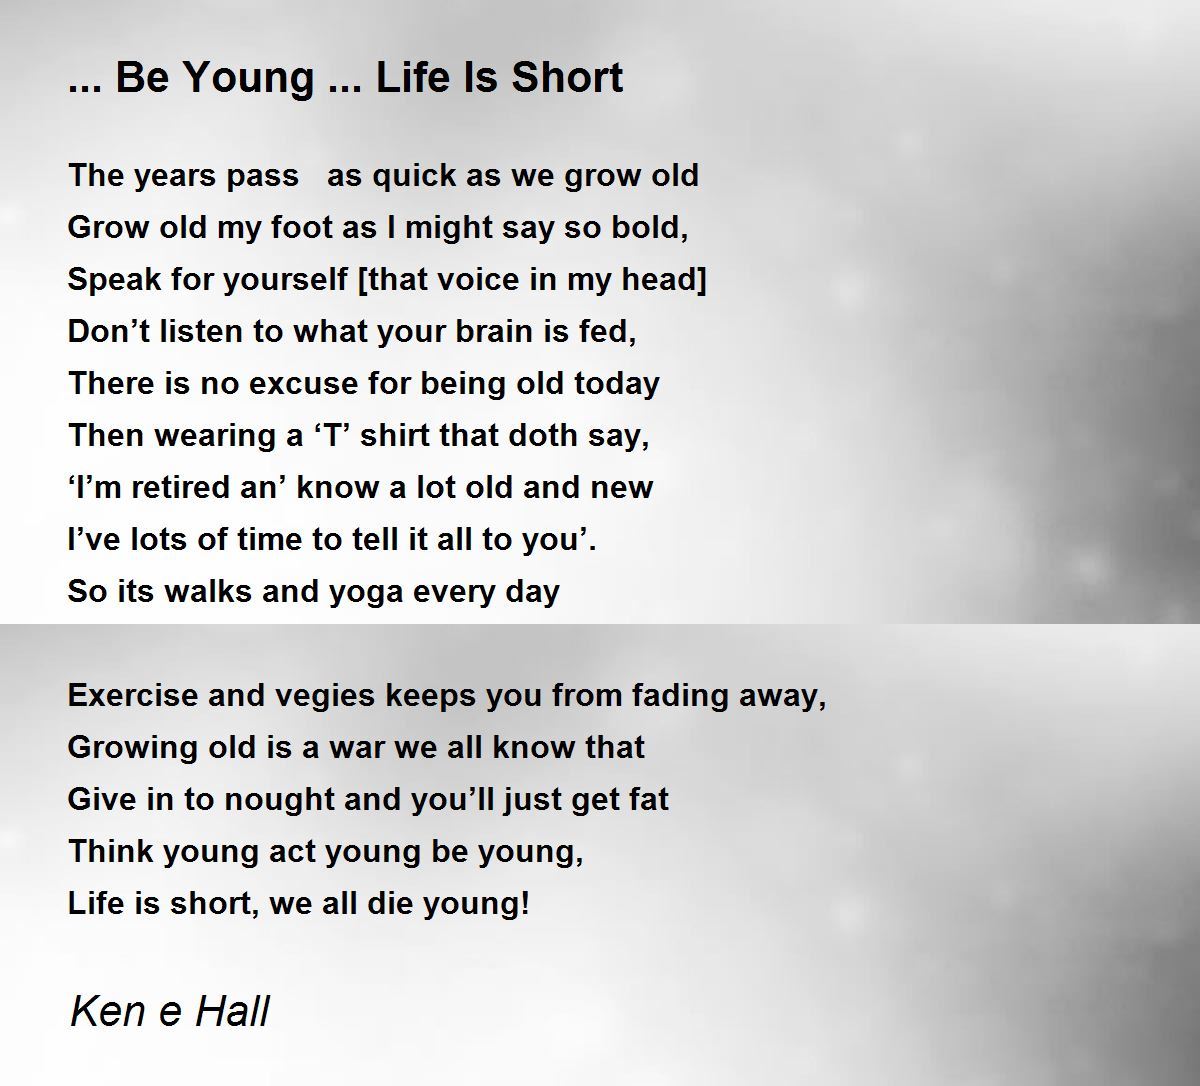 Be Young ... Life Is Short Poem by Ken e Hall - Poem Hunter